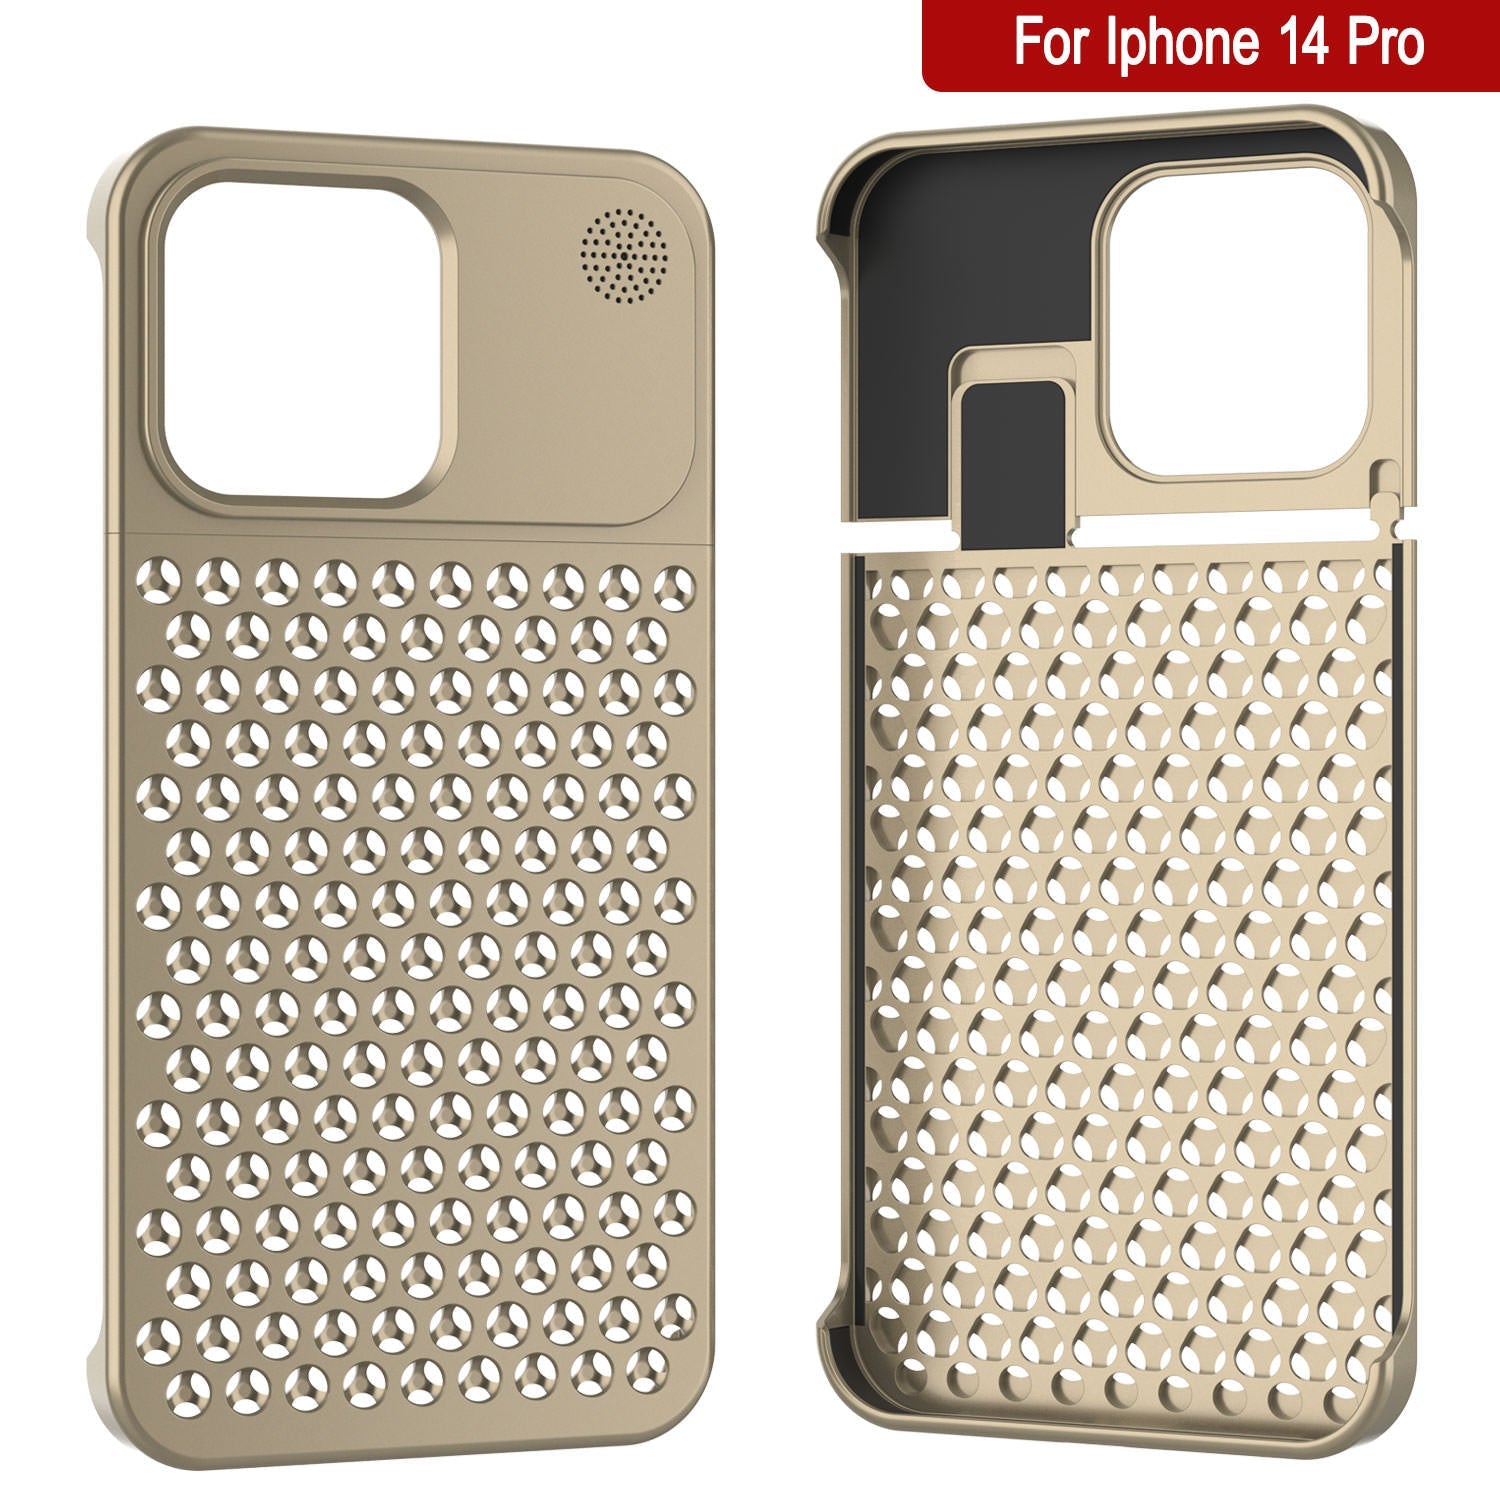 PunkCase for iPhone 14 Pro Aluminum Alloy Case [Fortifier Extreme Series] Ultra Durable Cover [Gold]